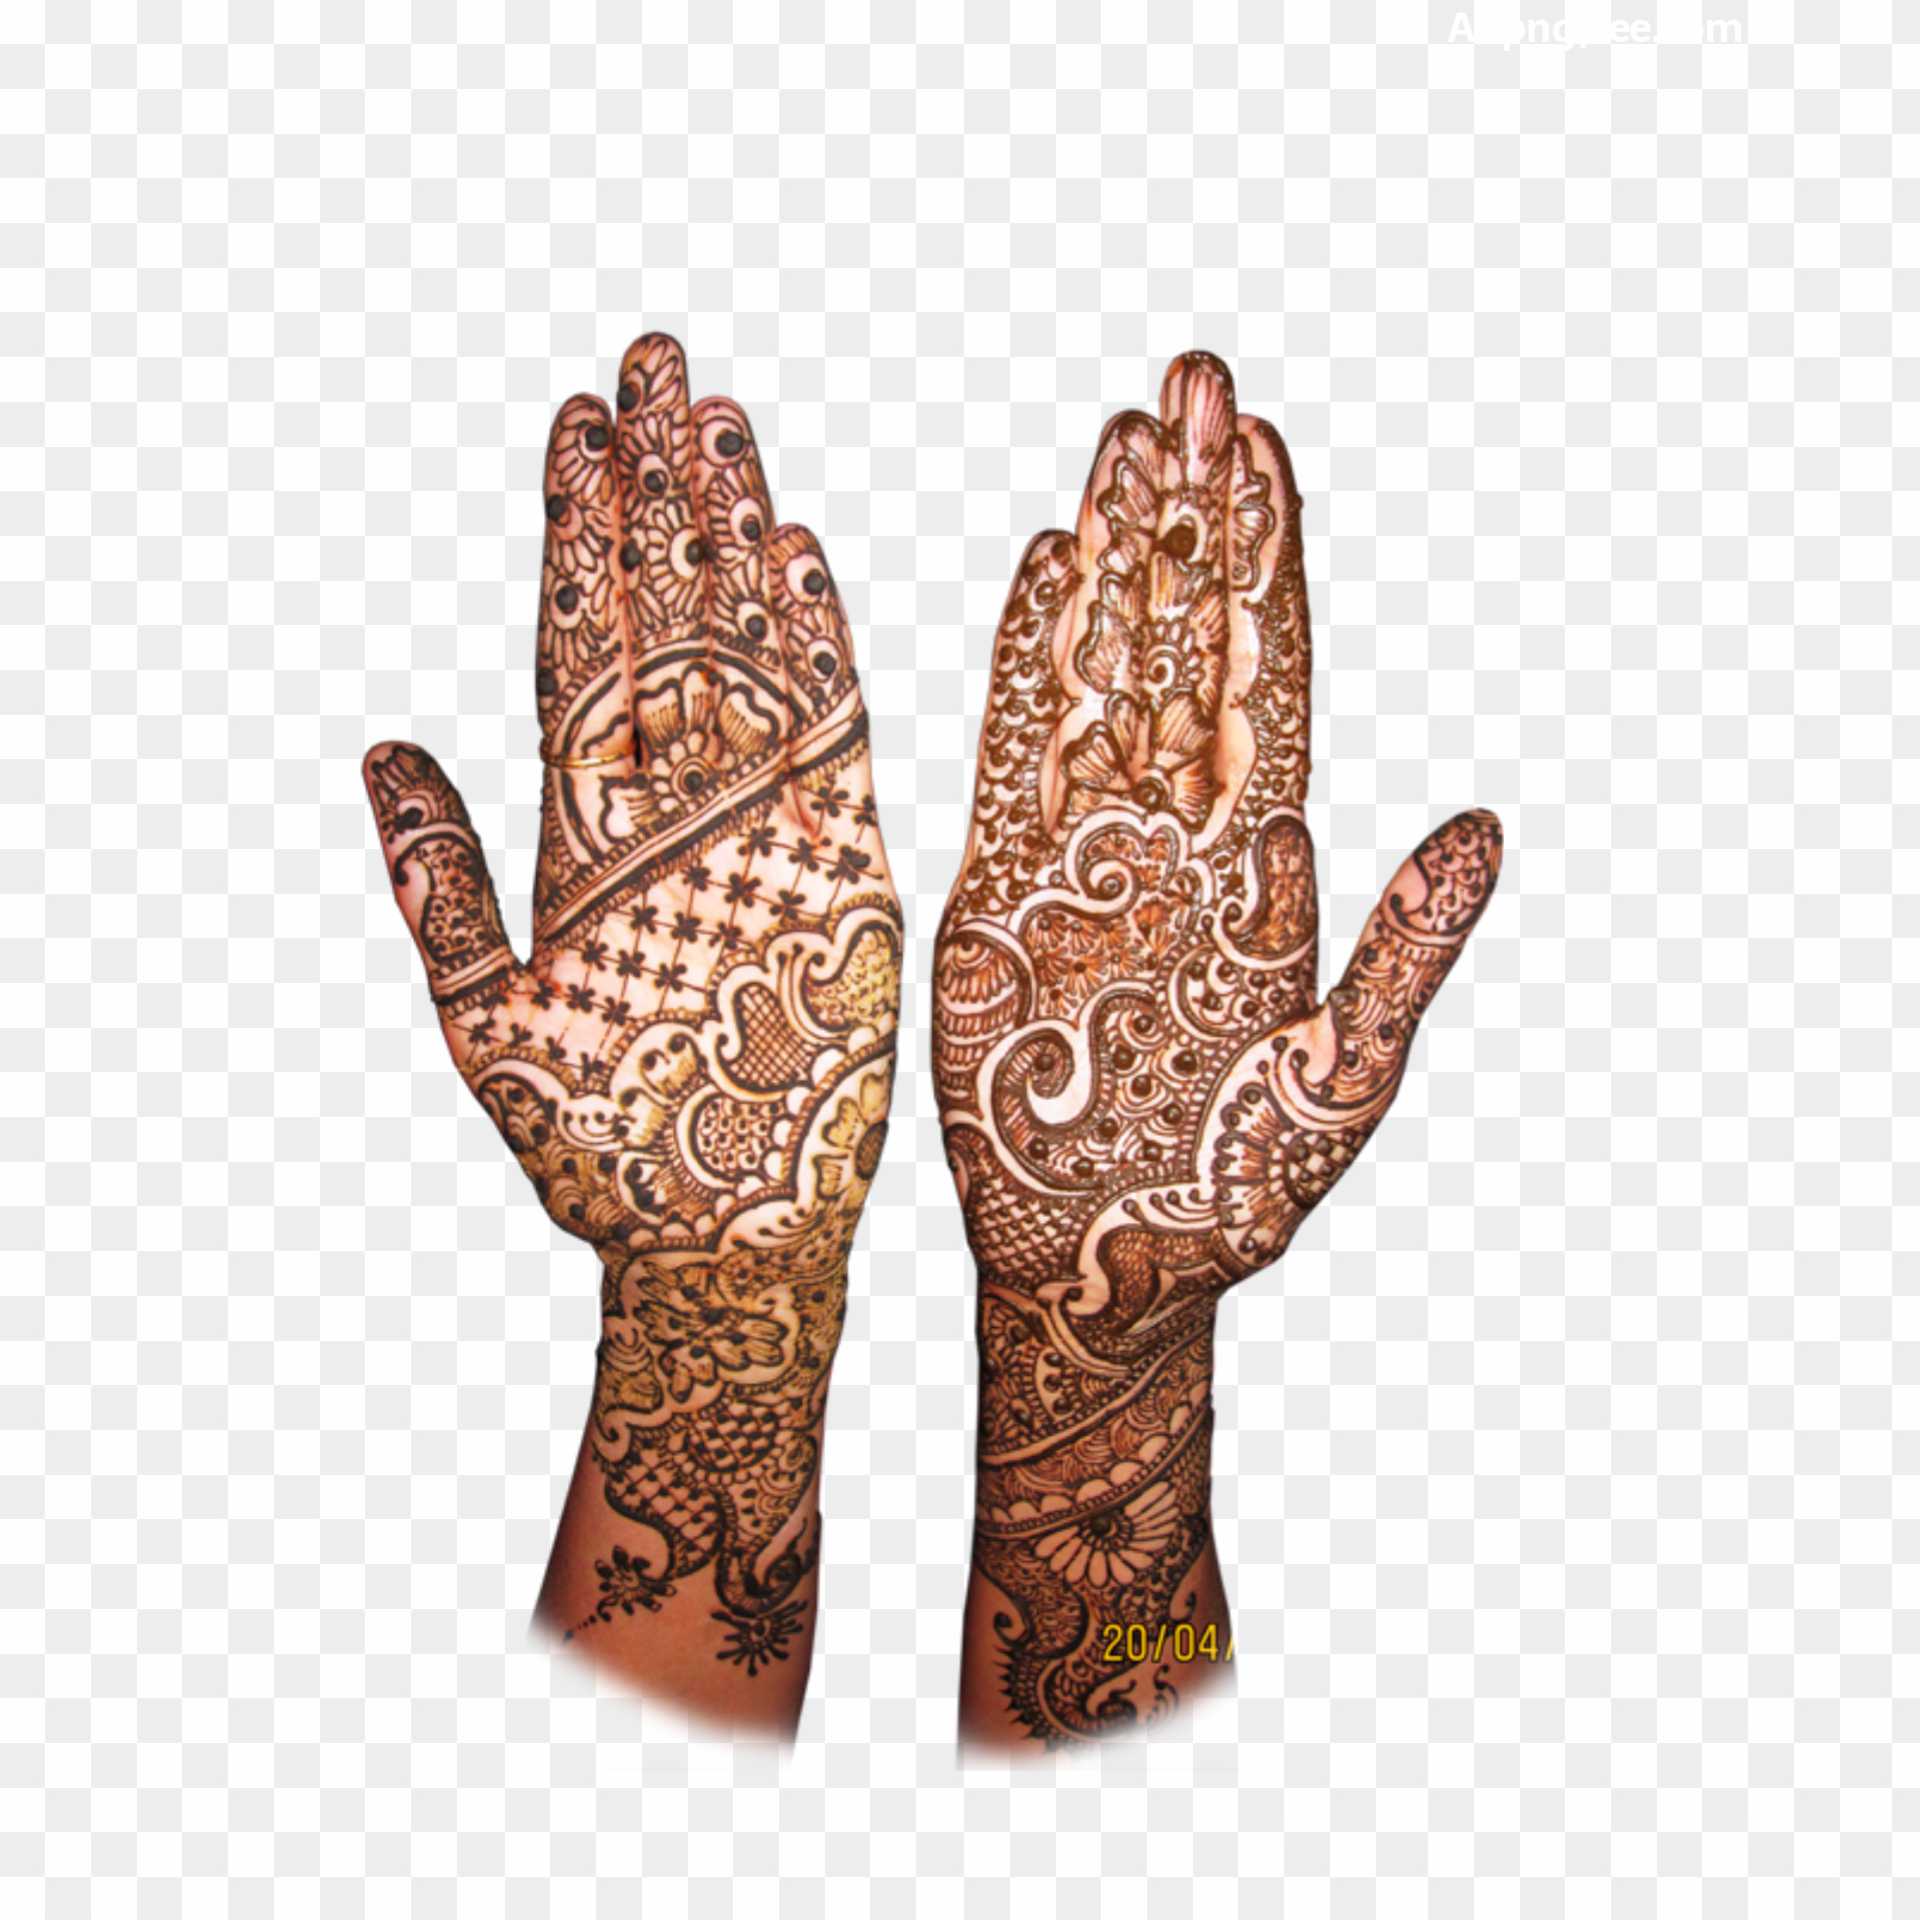 Mehndi hand PNG images download